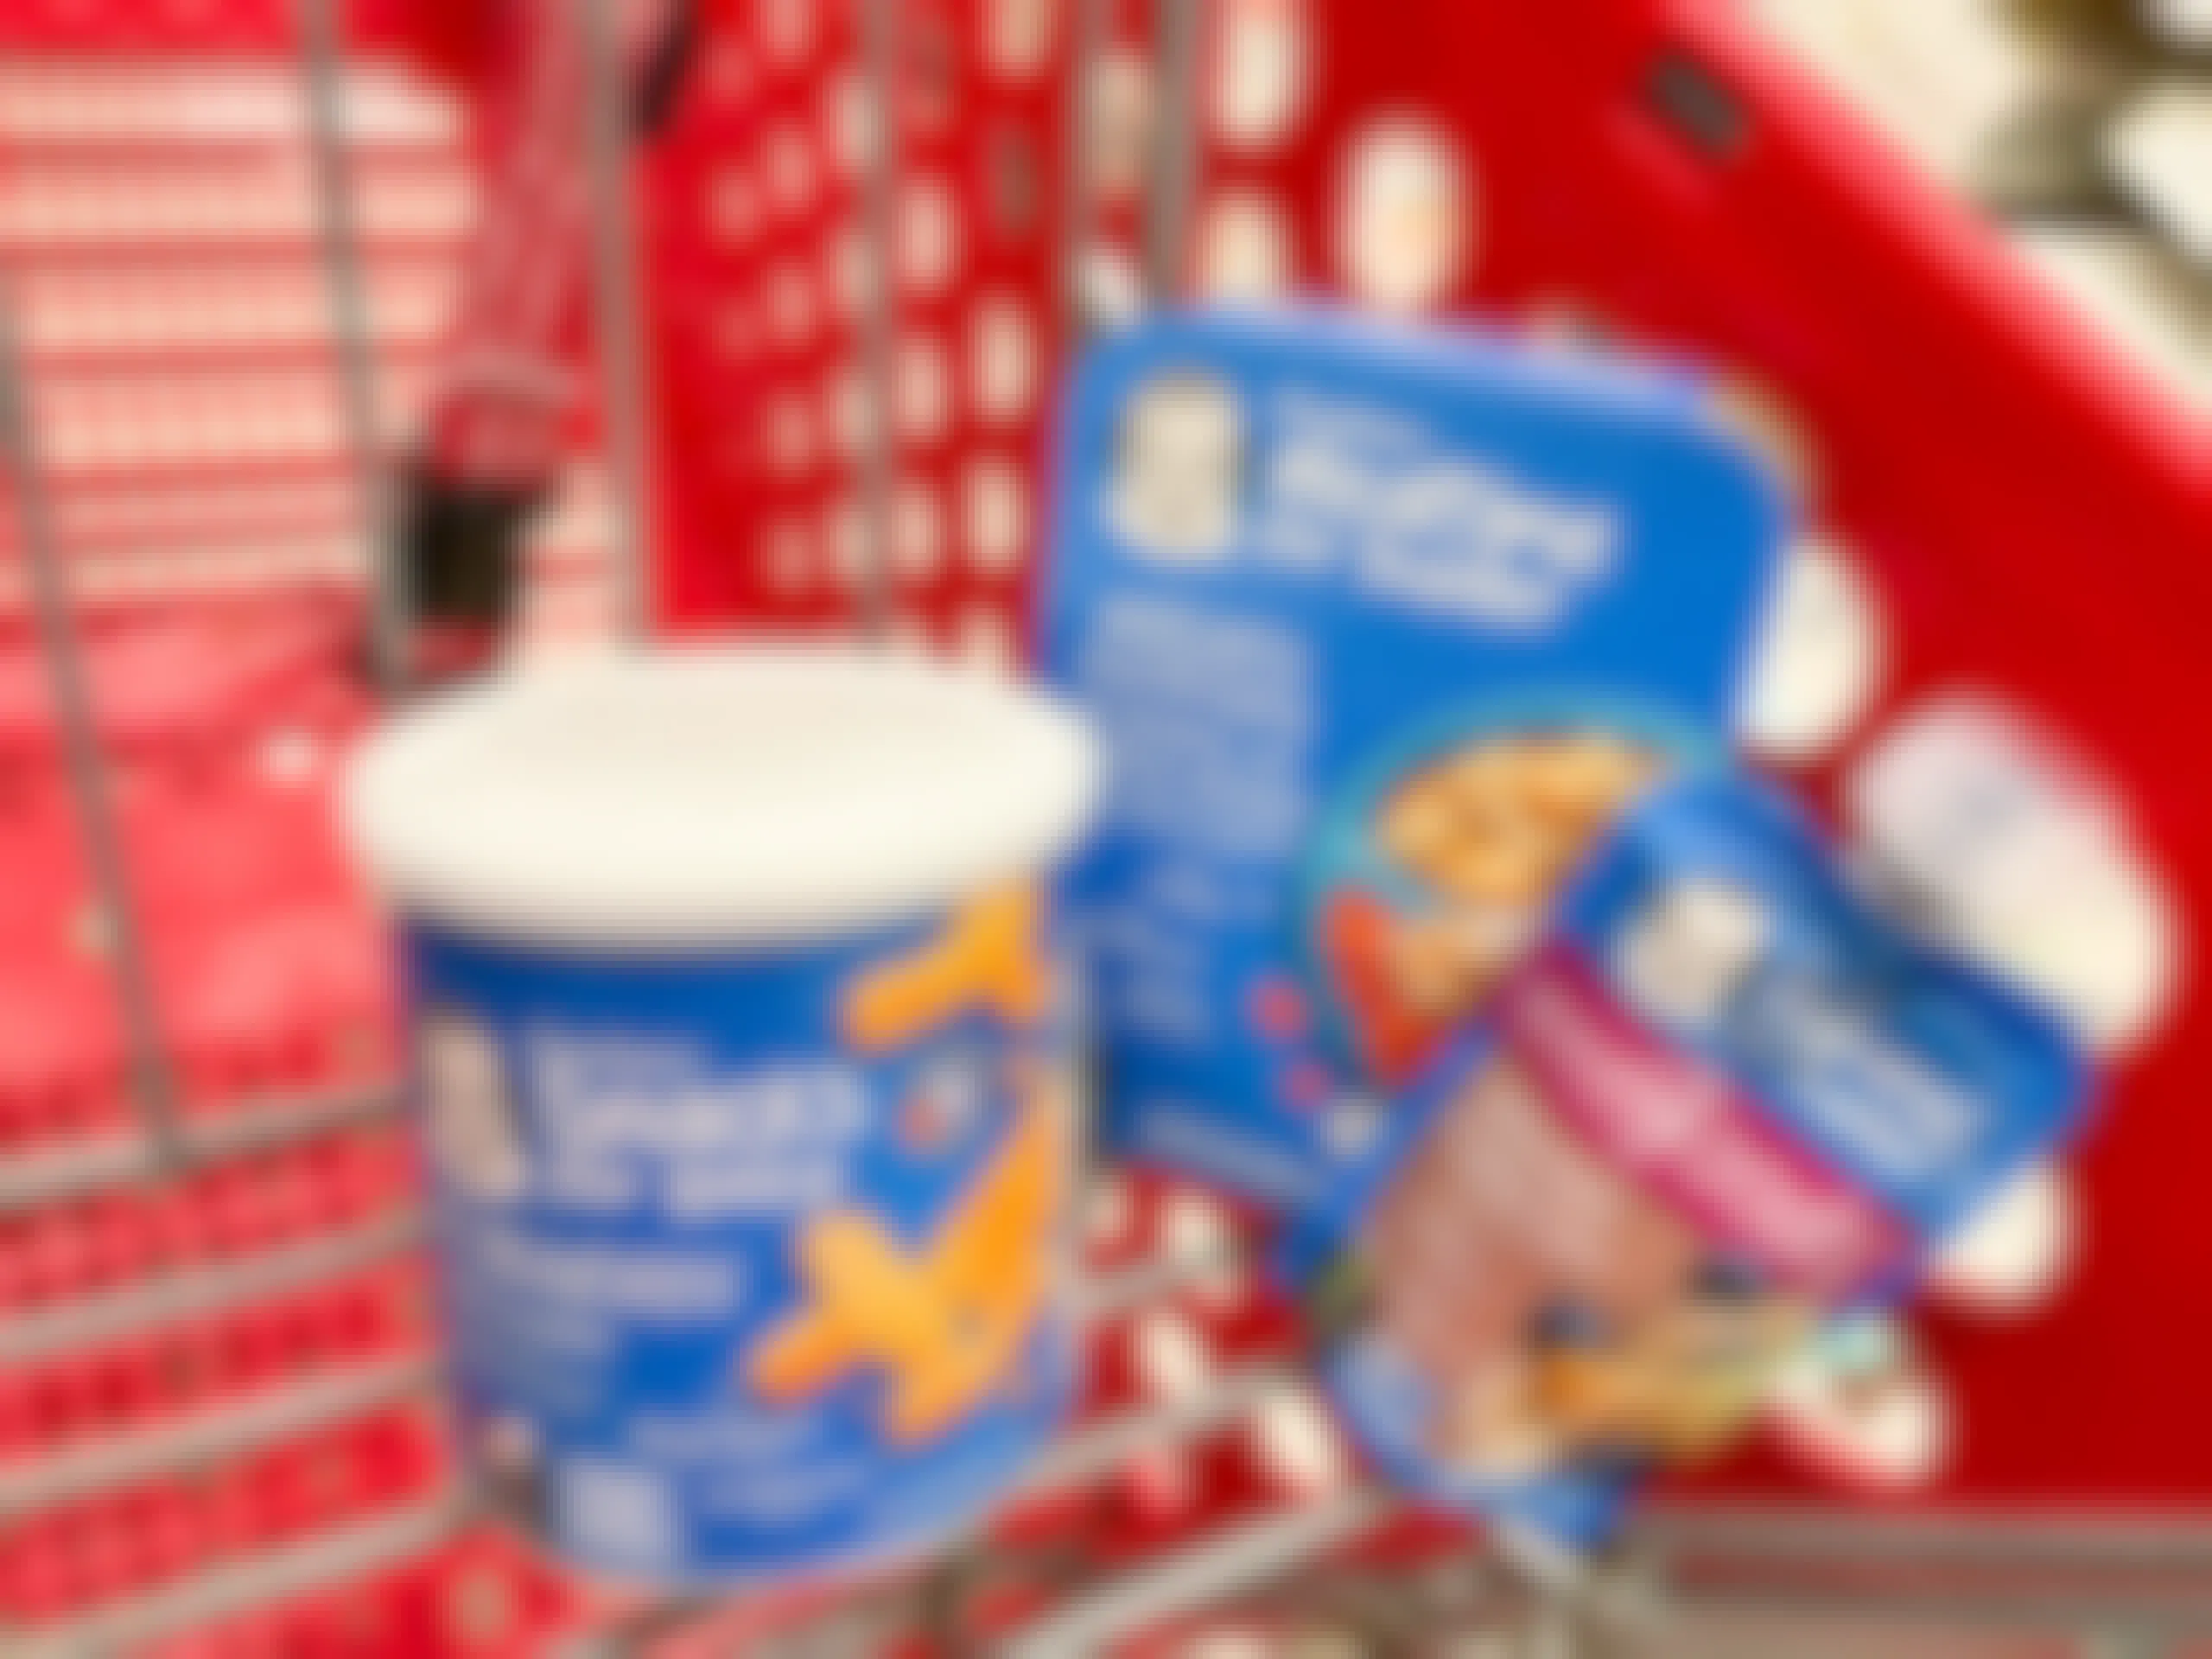 A variety of Gerber baby food sitting in a store cart.